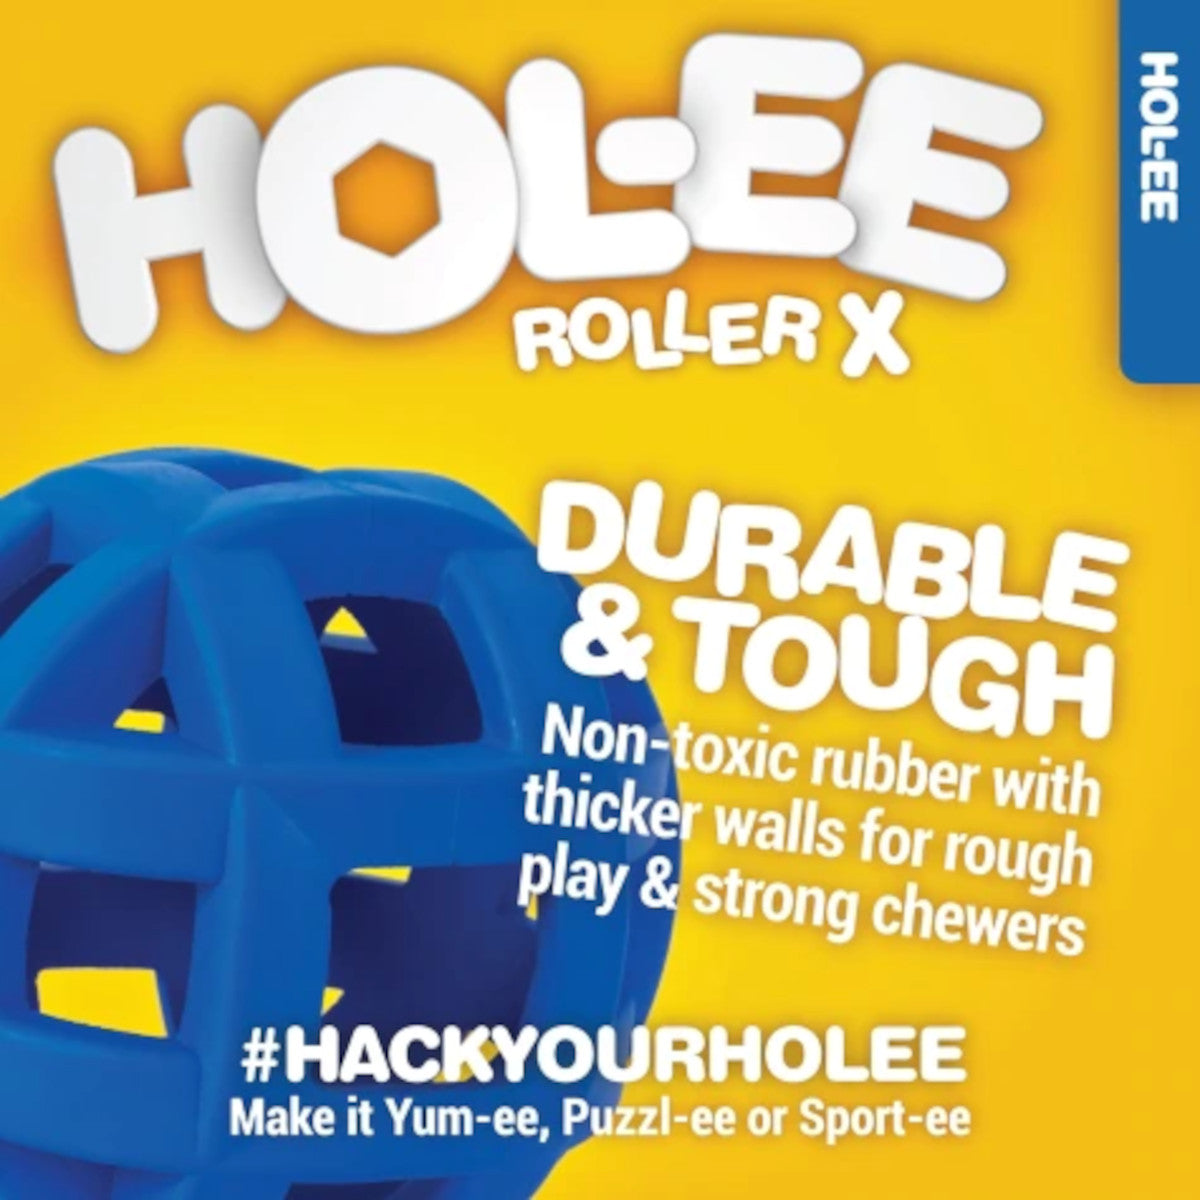 JW Hol-ee Roller X - Non-Toxic Durable & Tough Rubber Dog Toy.